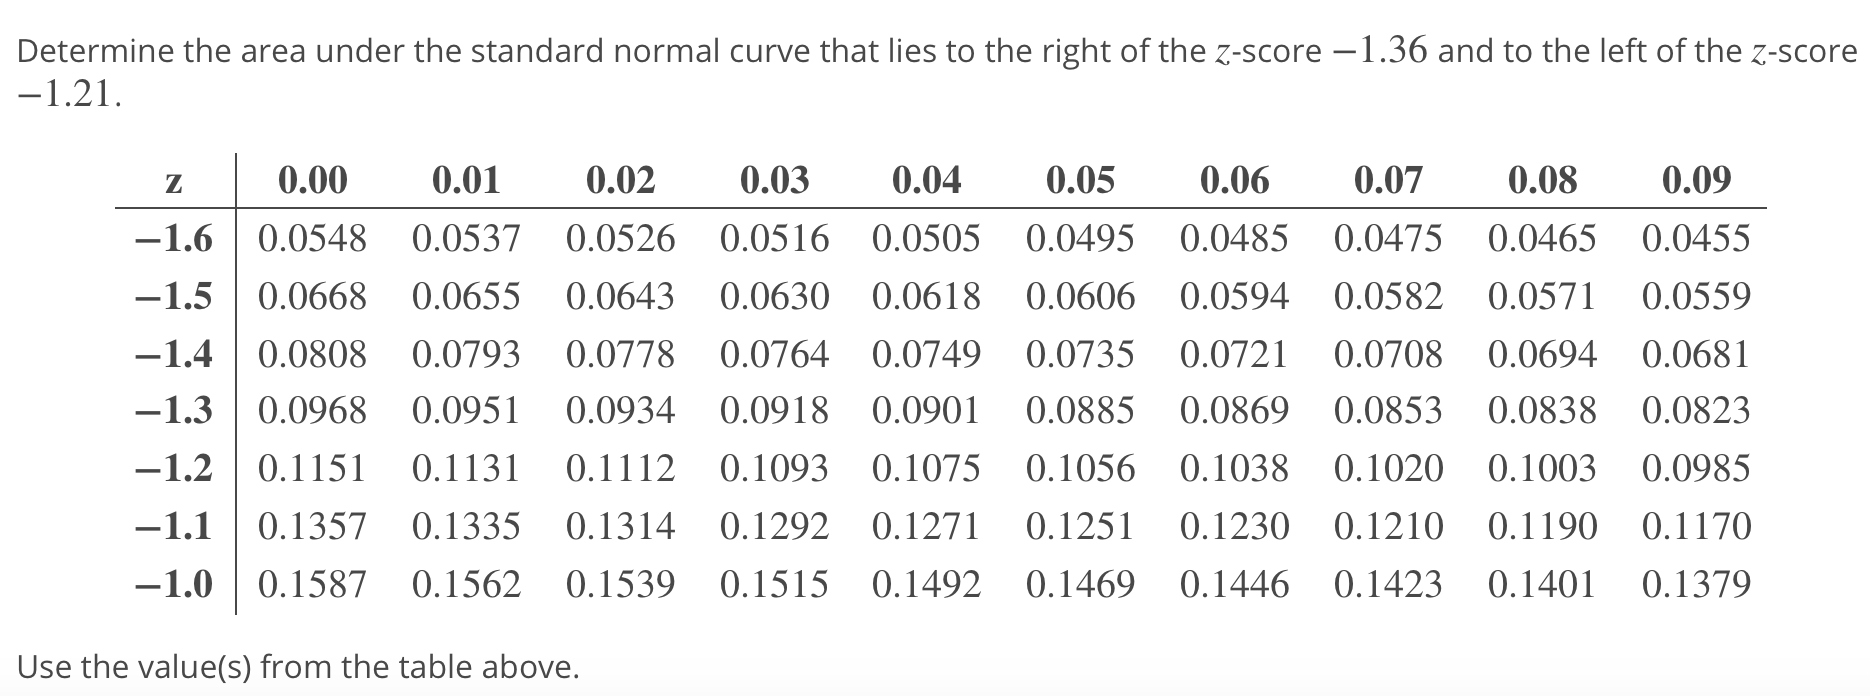 Determine the area under the standard normal curve that lies to the right of the z-score -1.36 and to the left of the z-score
0.00 0.01 0.02 0.03 0.04 0.05 0.06 0.07 0.08 0.09
-1.6 0.0548 0.0537 0.0526 0.0516 0.0505 0.0495 0.0485 0.0475 0.0465 0.0455
-1.5 0.0668 0.0655 0.0643 0.0630 0.0618 0.0606 0.0594 0.0582 0.0571 0.0559
-1.4|0.0808 0.0793 0.0778 0.0764 0.0749 0.0735 0.0721 0.0708 0.0694 0.0681
-1.3 0.0968 0.0951 0.0934 0.0918 0.0901 0.0885 0.0869 0.0853 0.0838 0.0823
-1.2 0.1151 0.1131 0.1112 0.1093 0.1075 0.1056 0.1038 0.1020 0.1003 0.0985
一1.110. 1357 0. 1335 0. 13 14 0. 1292 0.1271 0.1251 0.1230 0.1210 0.1190 0.1170
-1.0 0.1587 0.1562 0.1539 0.1515 0.1492 0.1469 0.1446 0.1423 0.1401 0.1379
Use the value(s) from the table above.
